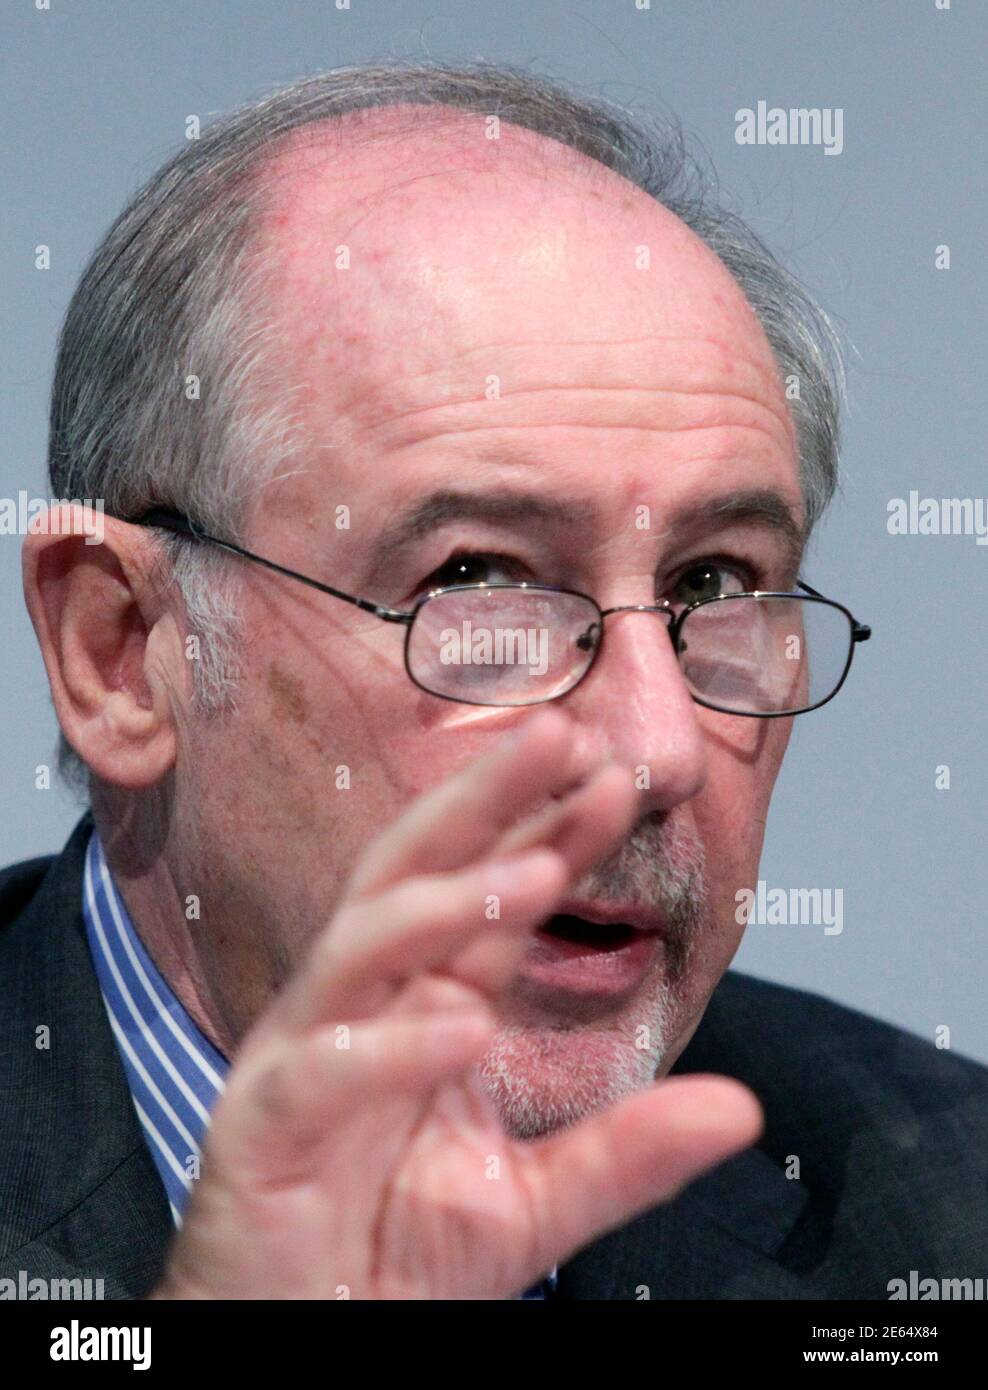 Former Managing Director of the International Monetary Fund (IMF) Rodrigo de Rato y Figaredo makes a speech during a meeting of the OeNB on the issue of 'Financial Crisis & Basel III' in Vienna October 3, 2011.    REUTERS/Herwig Prammer (AUSTRIA - Tags: BUSINESS) Stock Photo